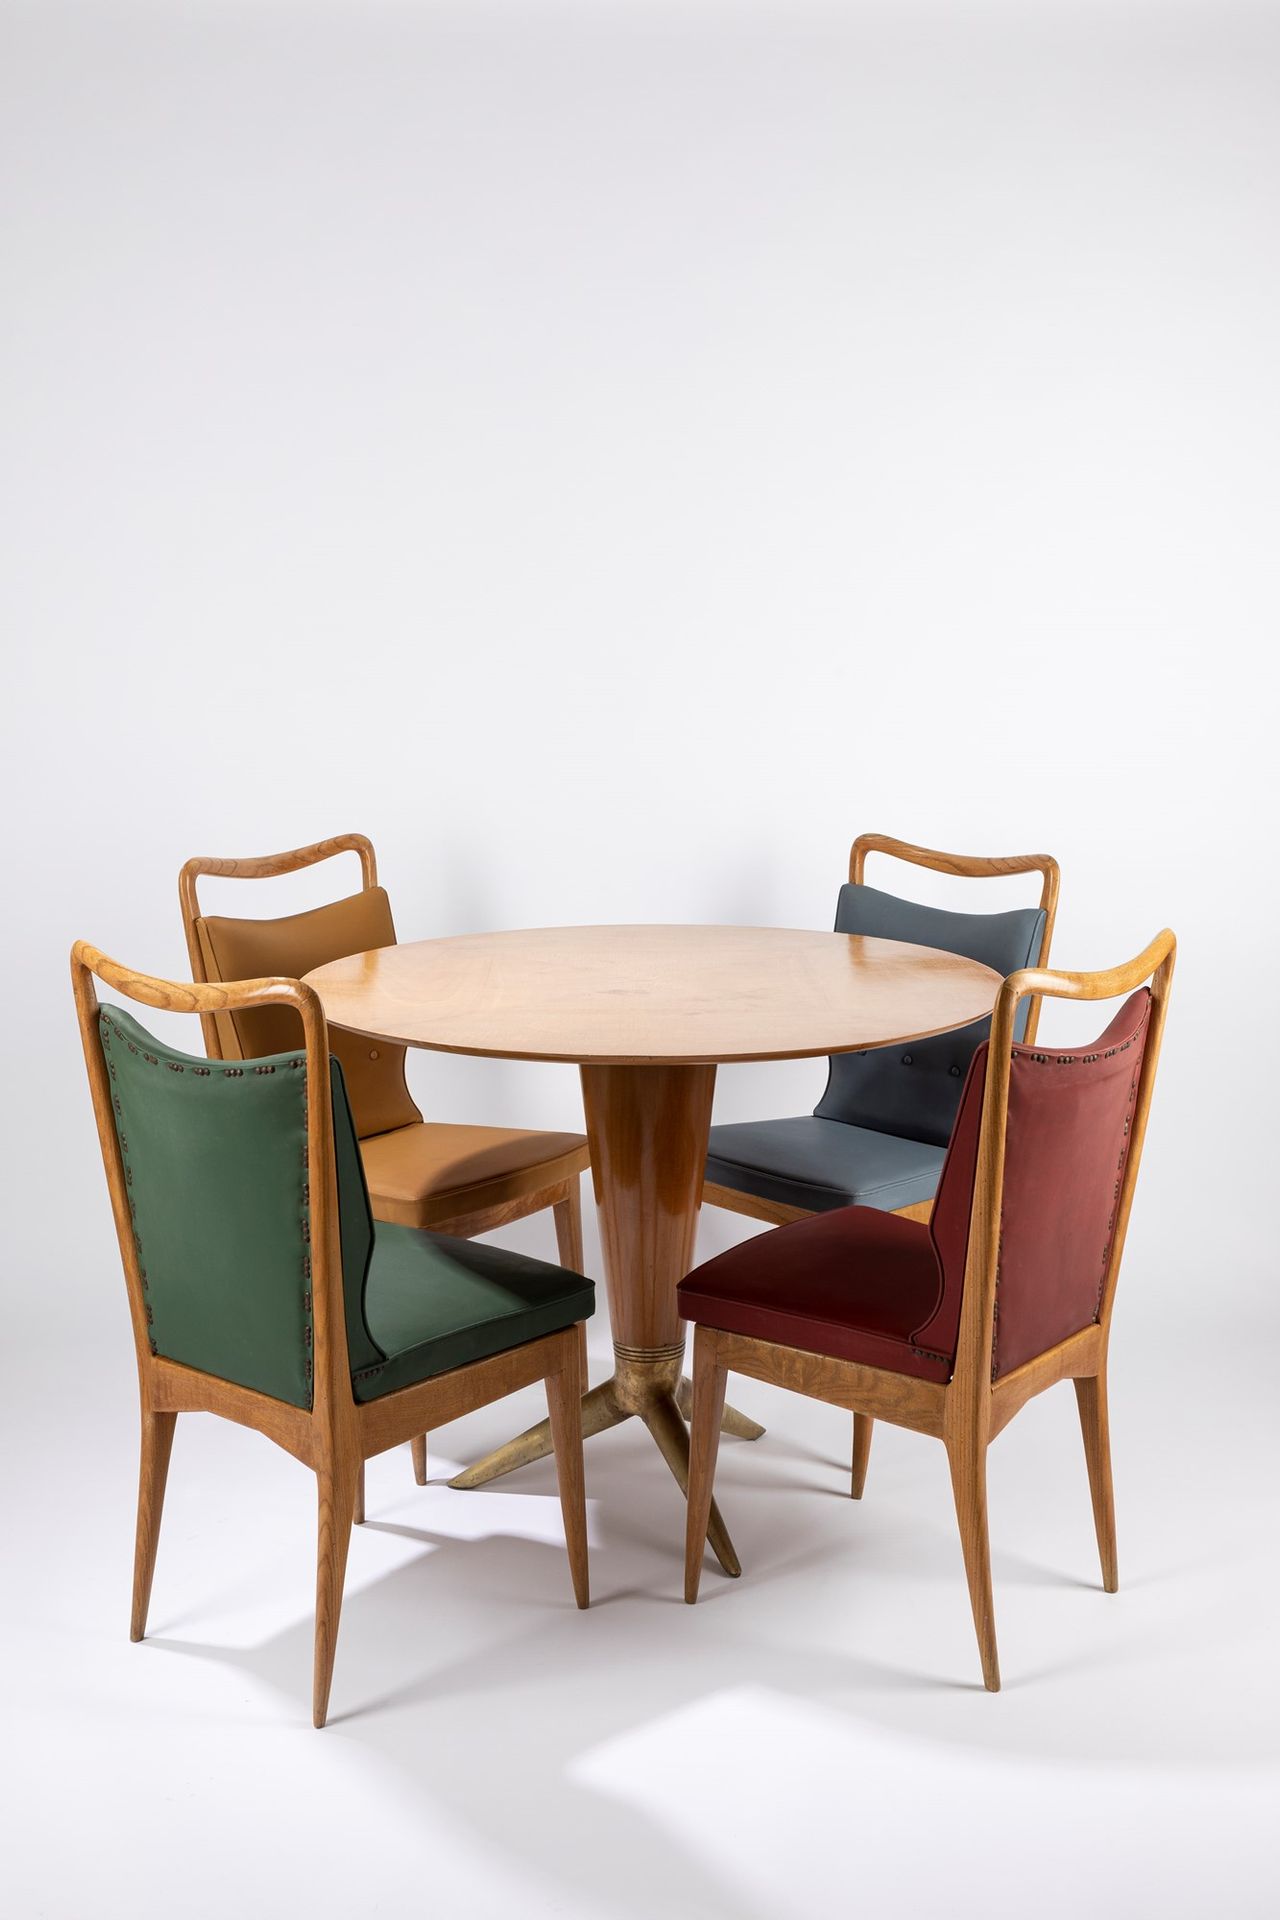 ISA, Bergamo Table and four chairs, 1950 ca.

Chairs 90 x 50 x 50 - Table 79 x 1&hellip;